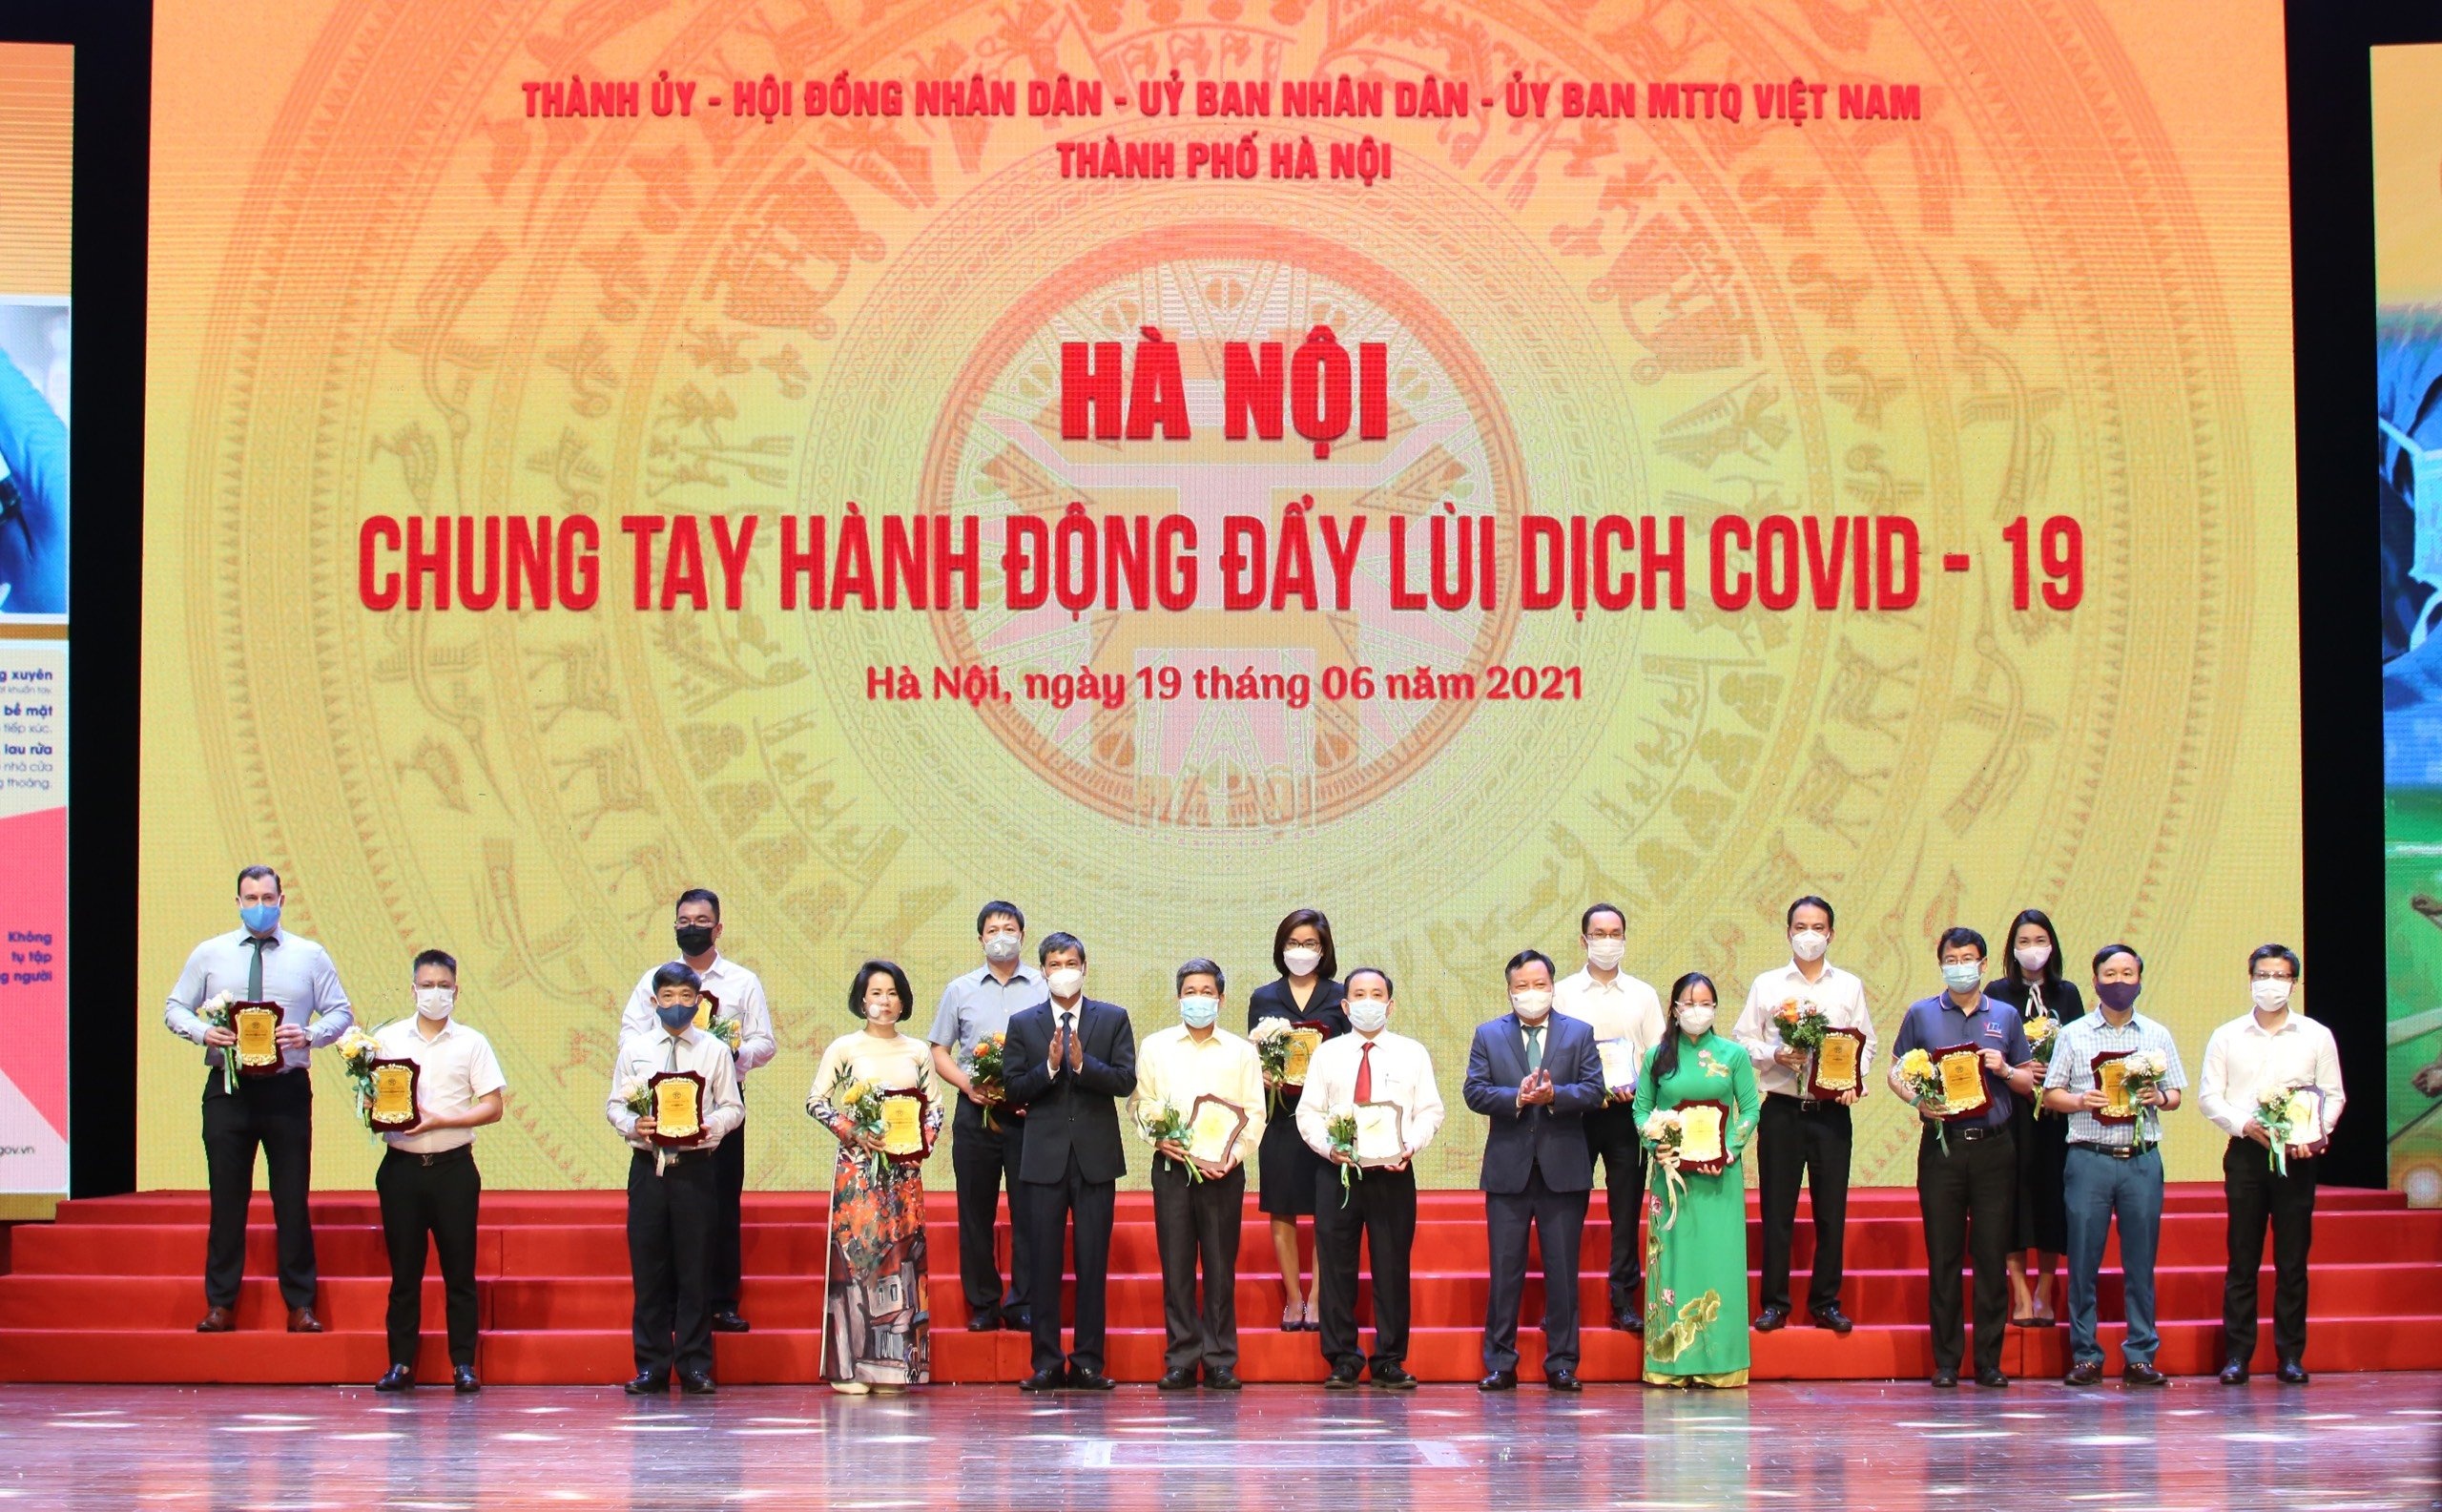 ha noi chung tay hanh dong day lui dich covid 19